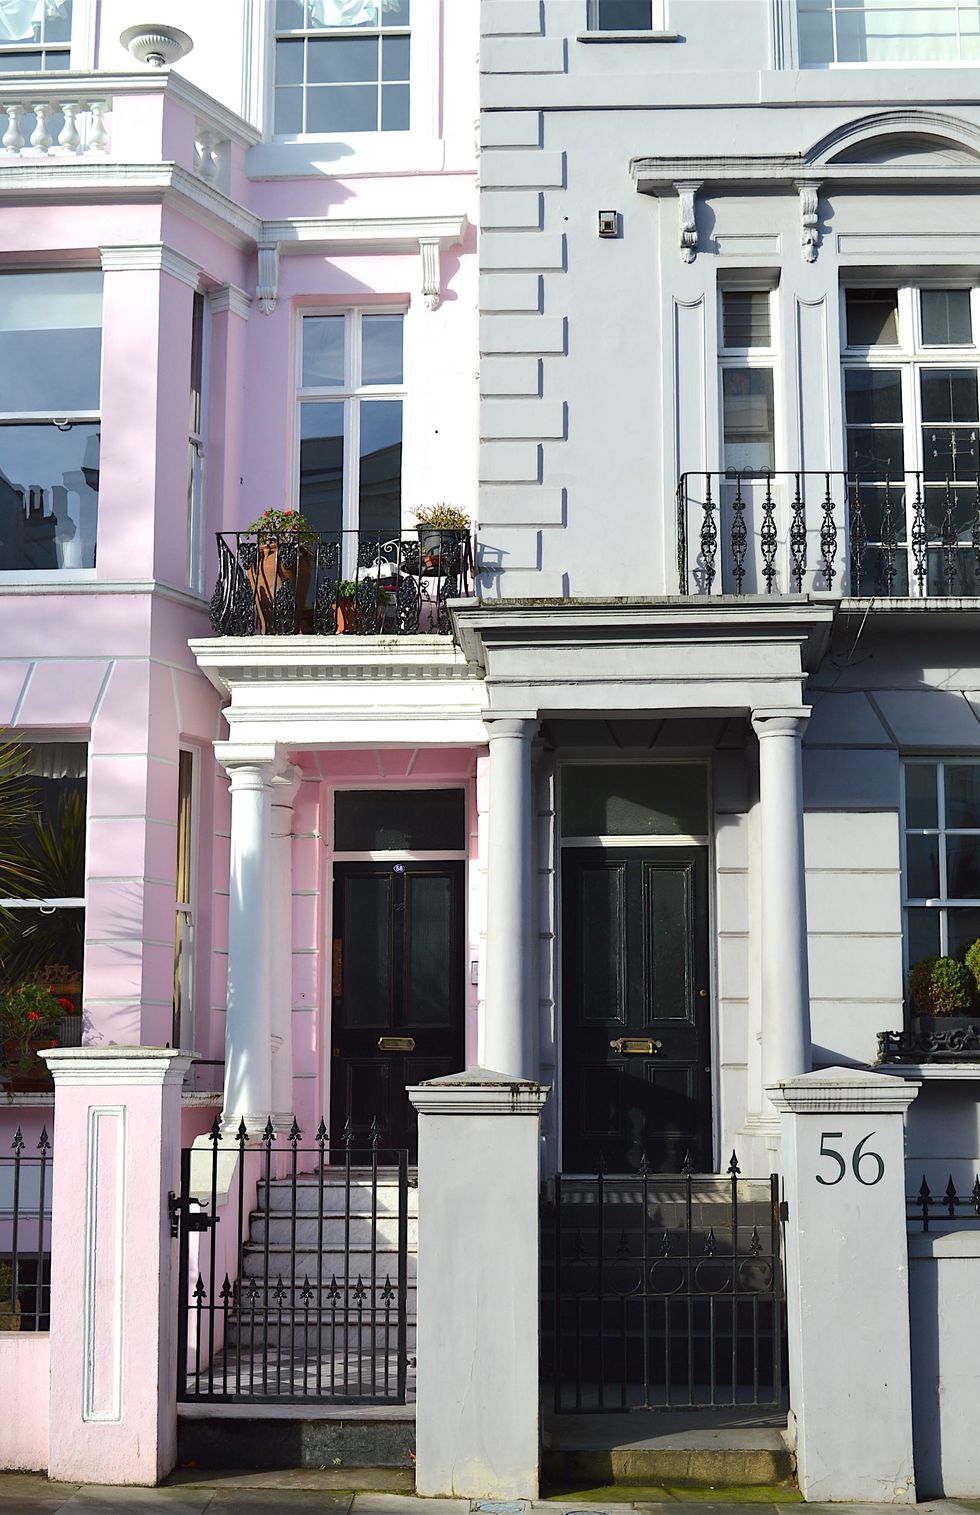 You can find the most beautiful and colorful houses in Notting Hill–if you're looking for a Hollywood tour of London, try and spot the blue door from its cameo in the famous film with Hugh Grant and Julia Roberts!  